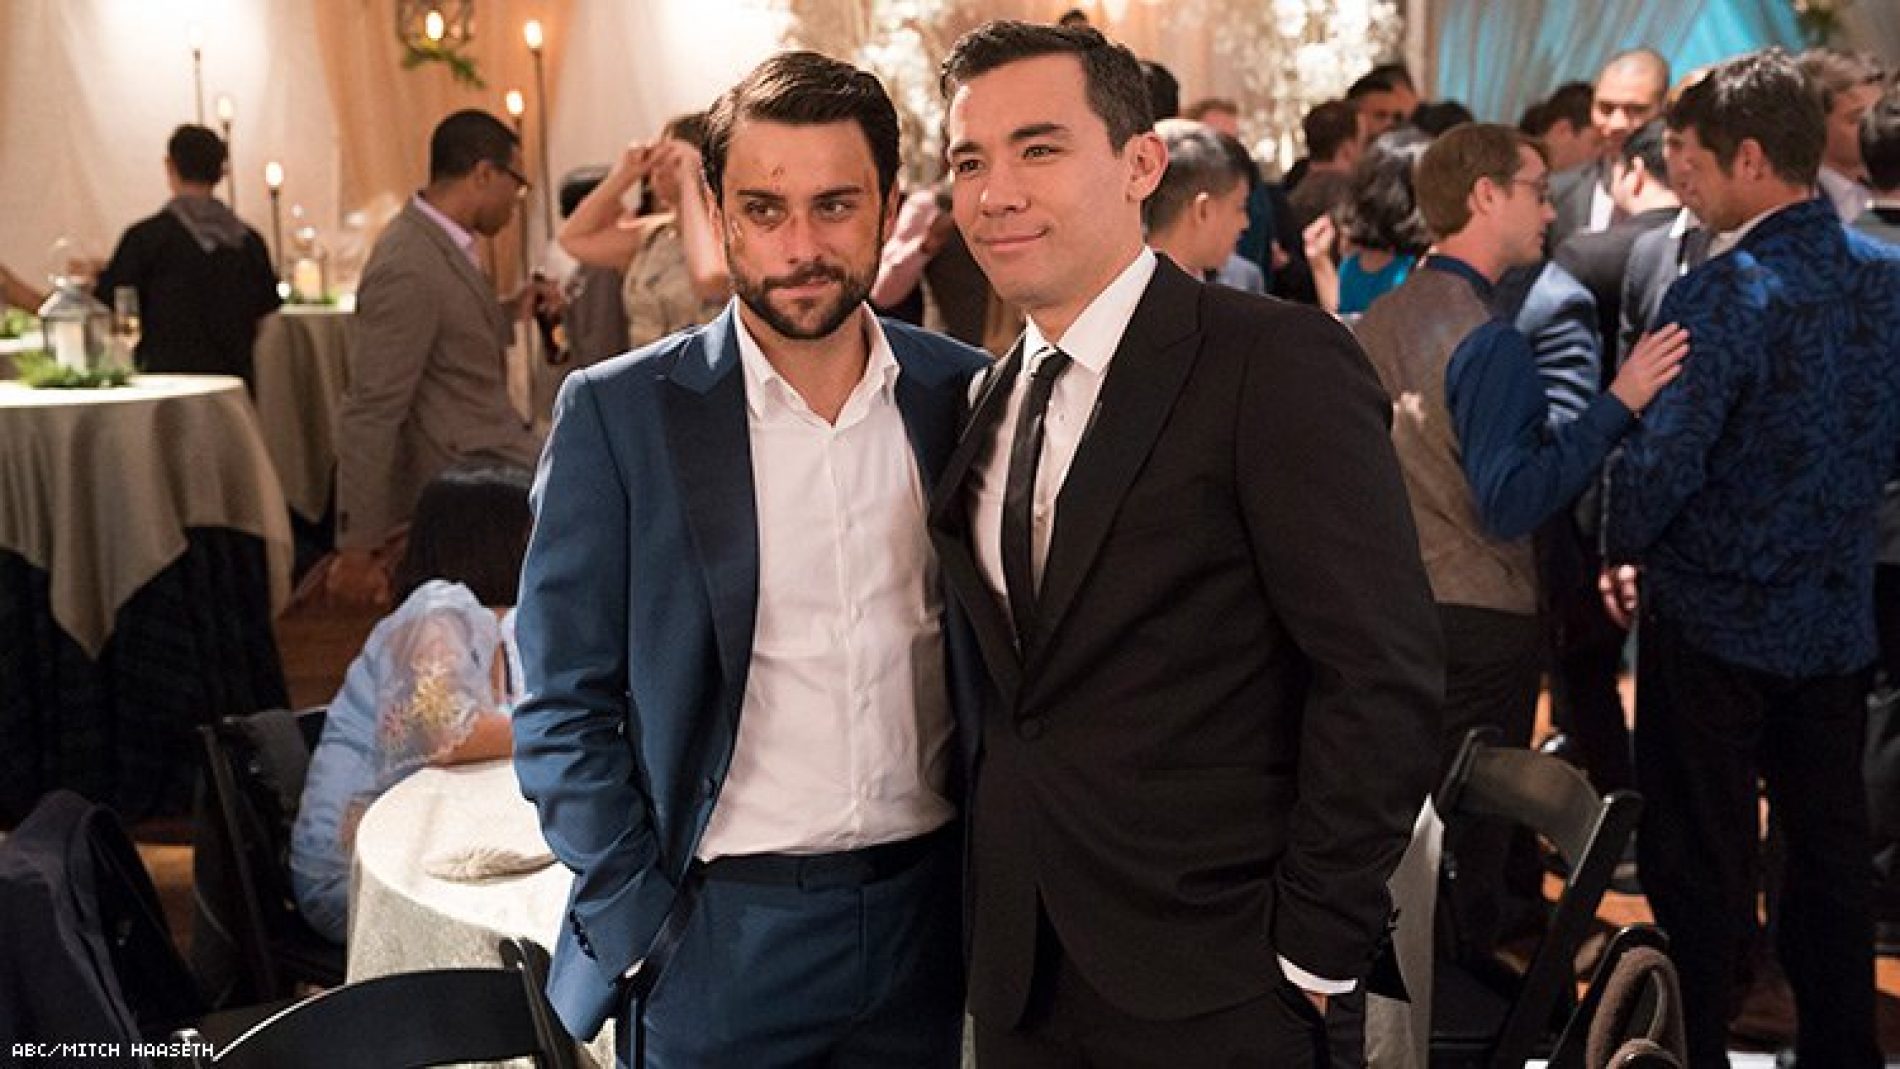 ‘How To Get Away With Murder’ Gives Us A Gay Wedding